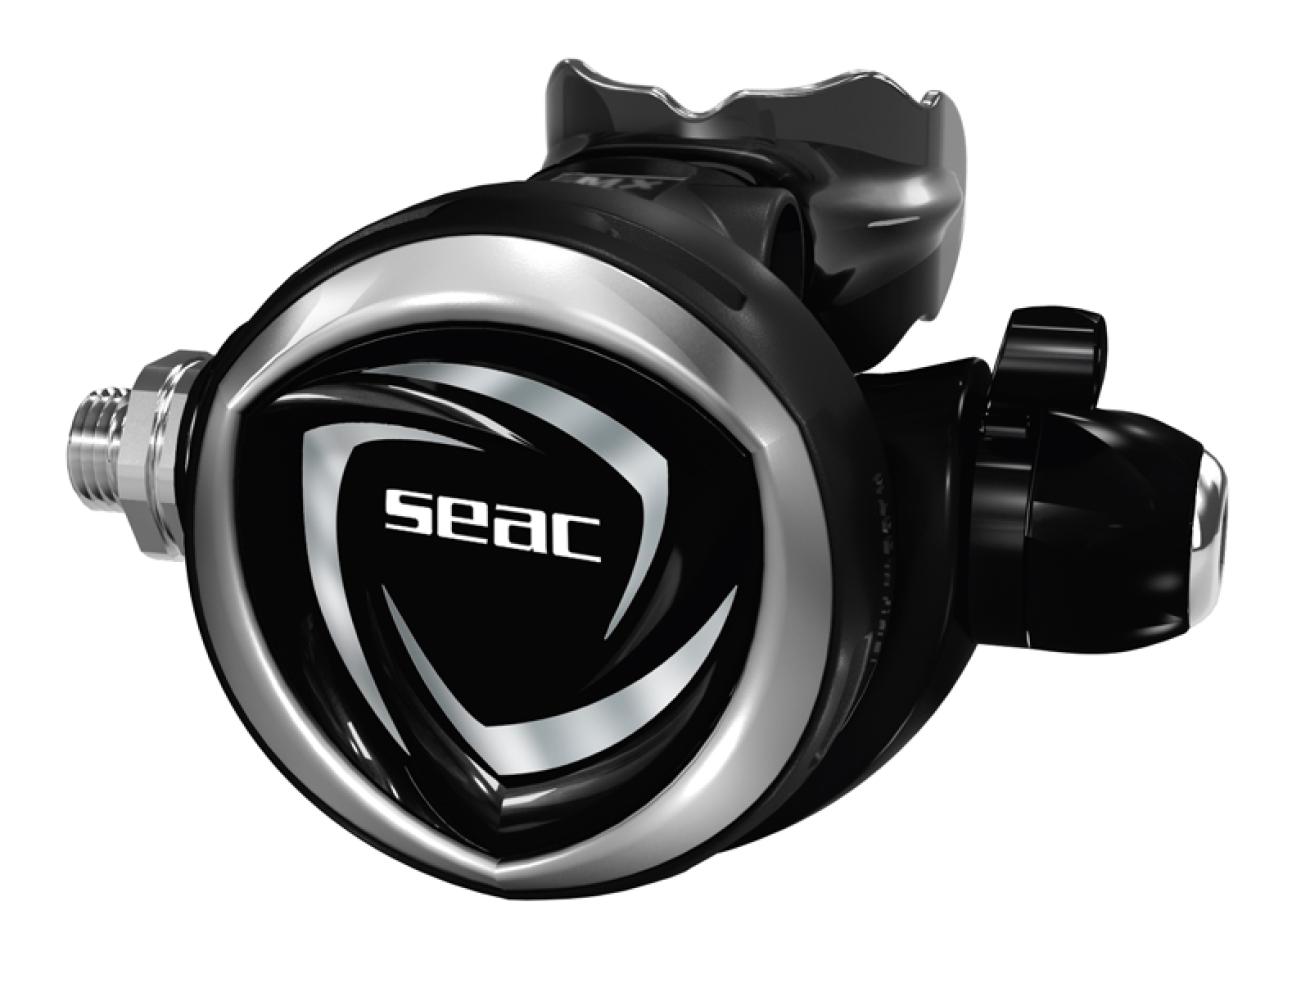 The SEAC DX200 is your best bet if you want a versatile, lightweight regulator that delivers maximum performance